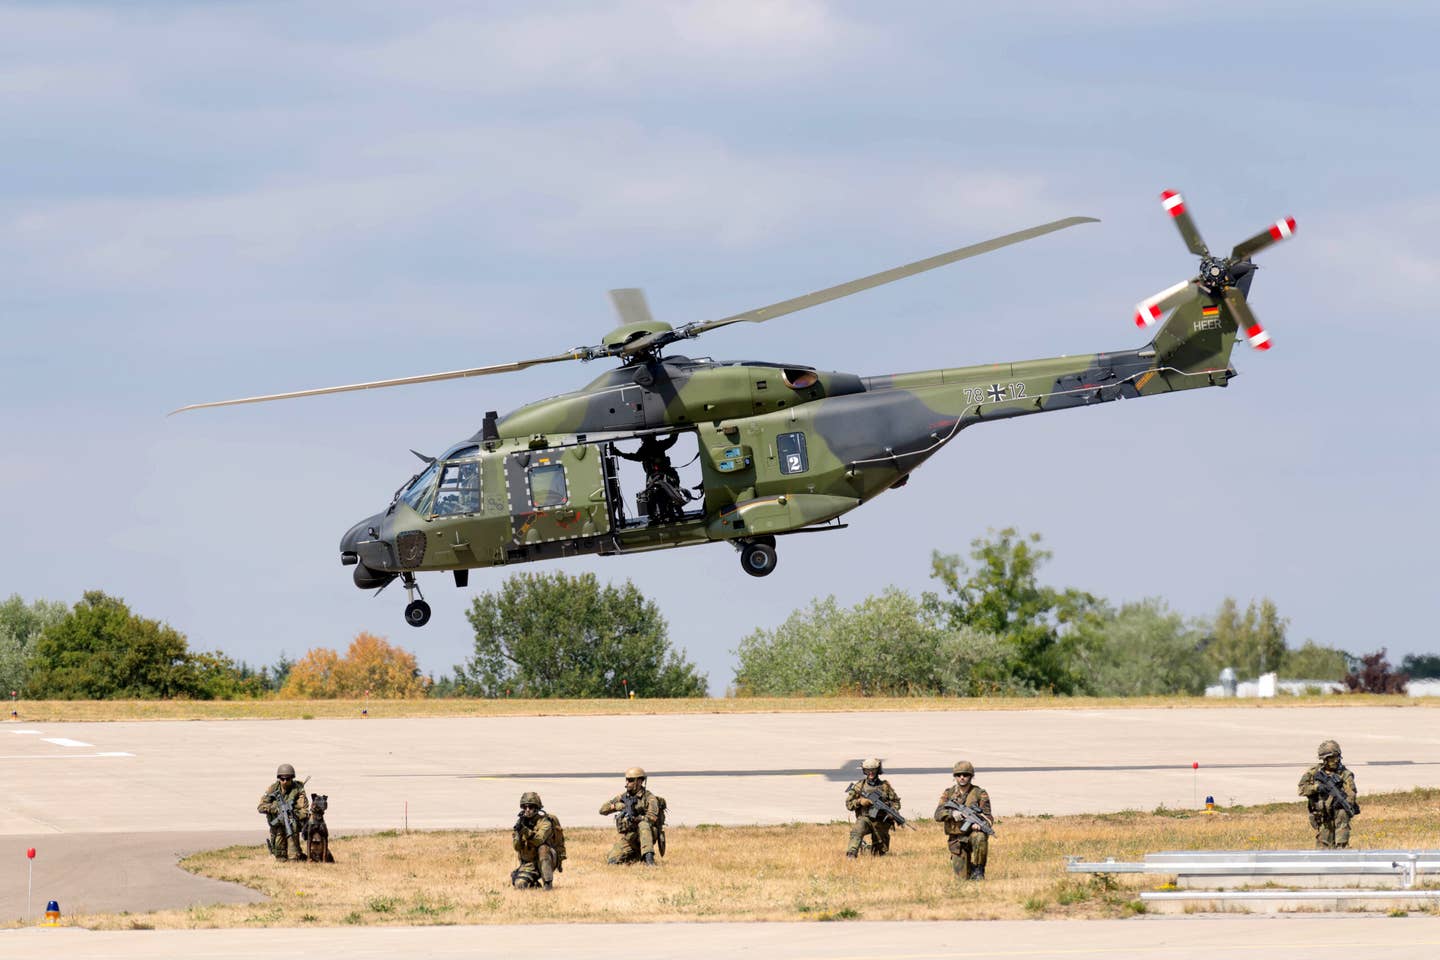 A German Army NH90 from Transporthubschrauberregiment 30 based at Niederstetten takes part in a dynamic demonstration for the German Ministry of Defense in 2018. <em>Bundeswehr/Martin Stollberg</em>